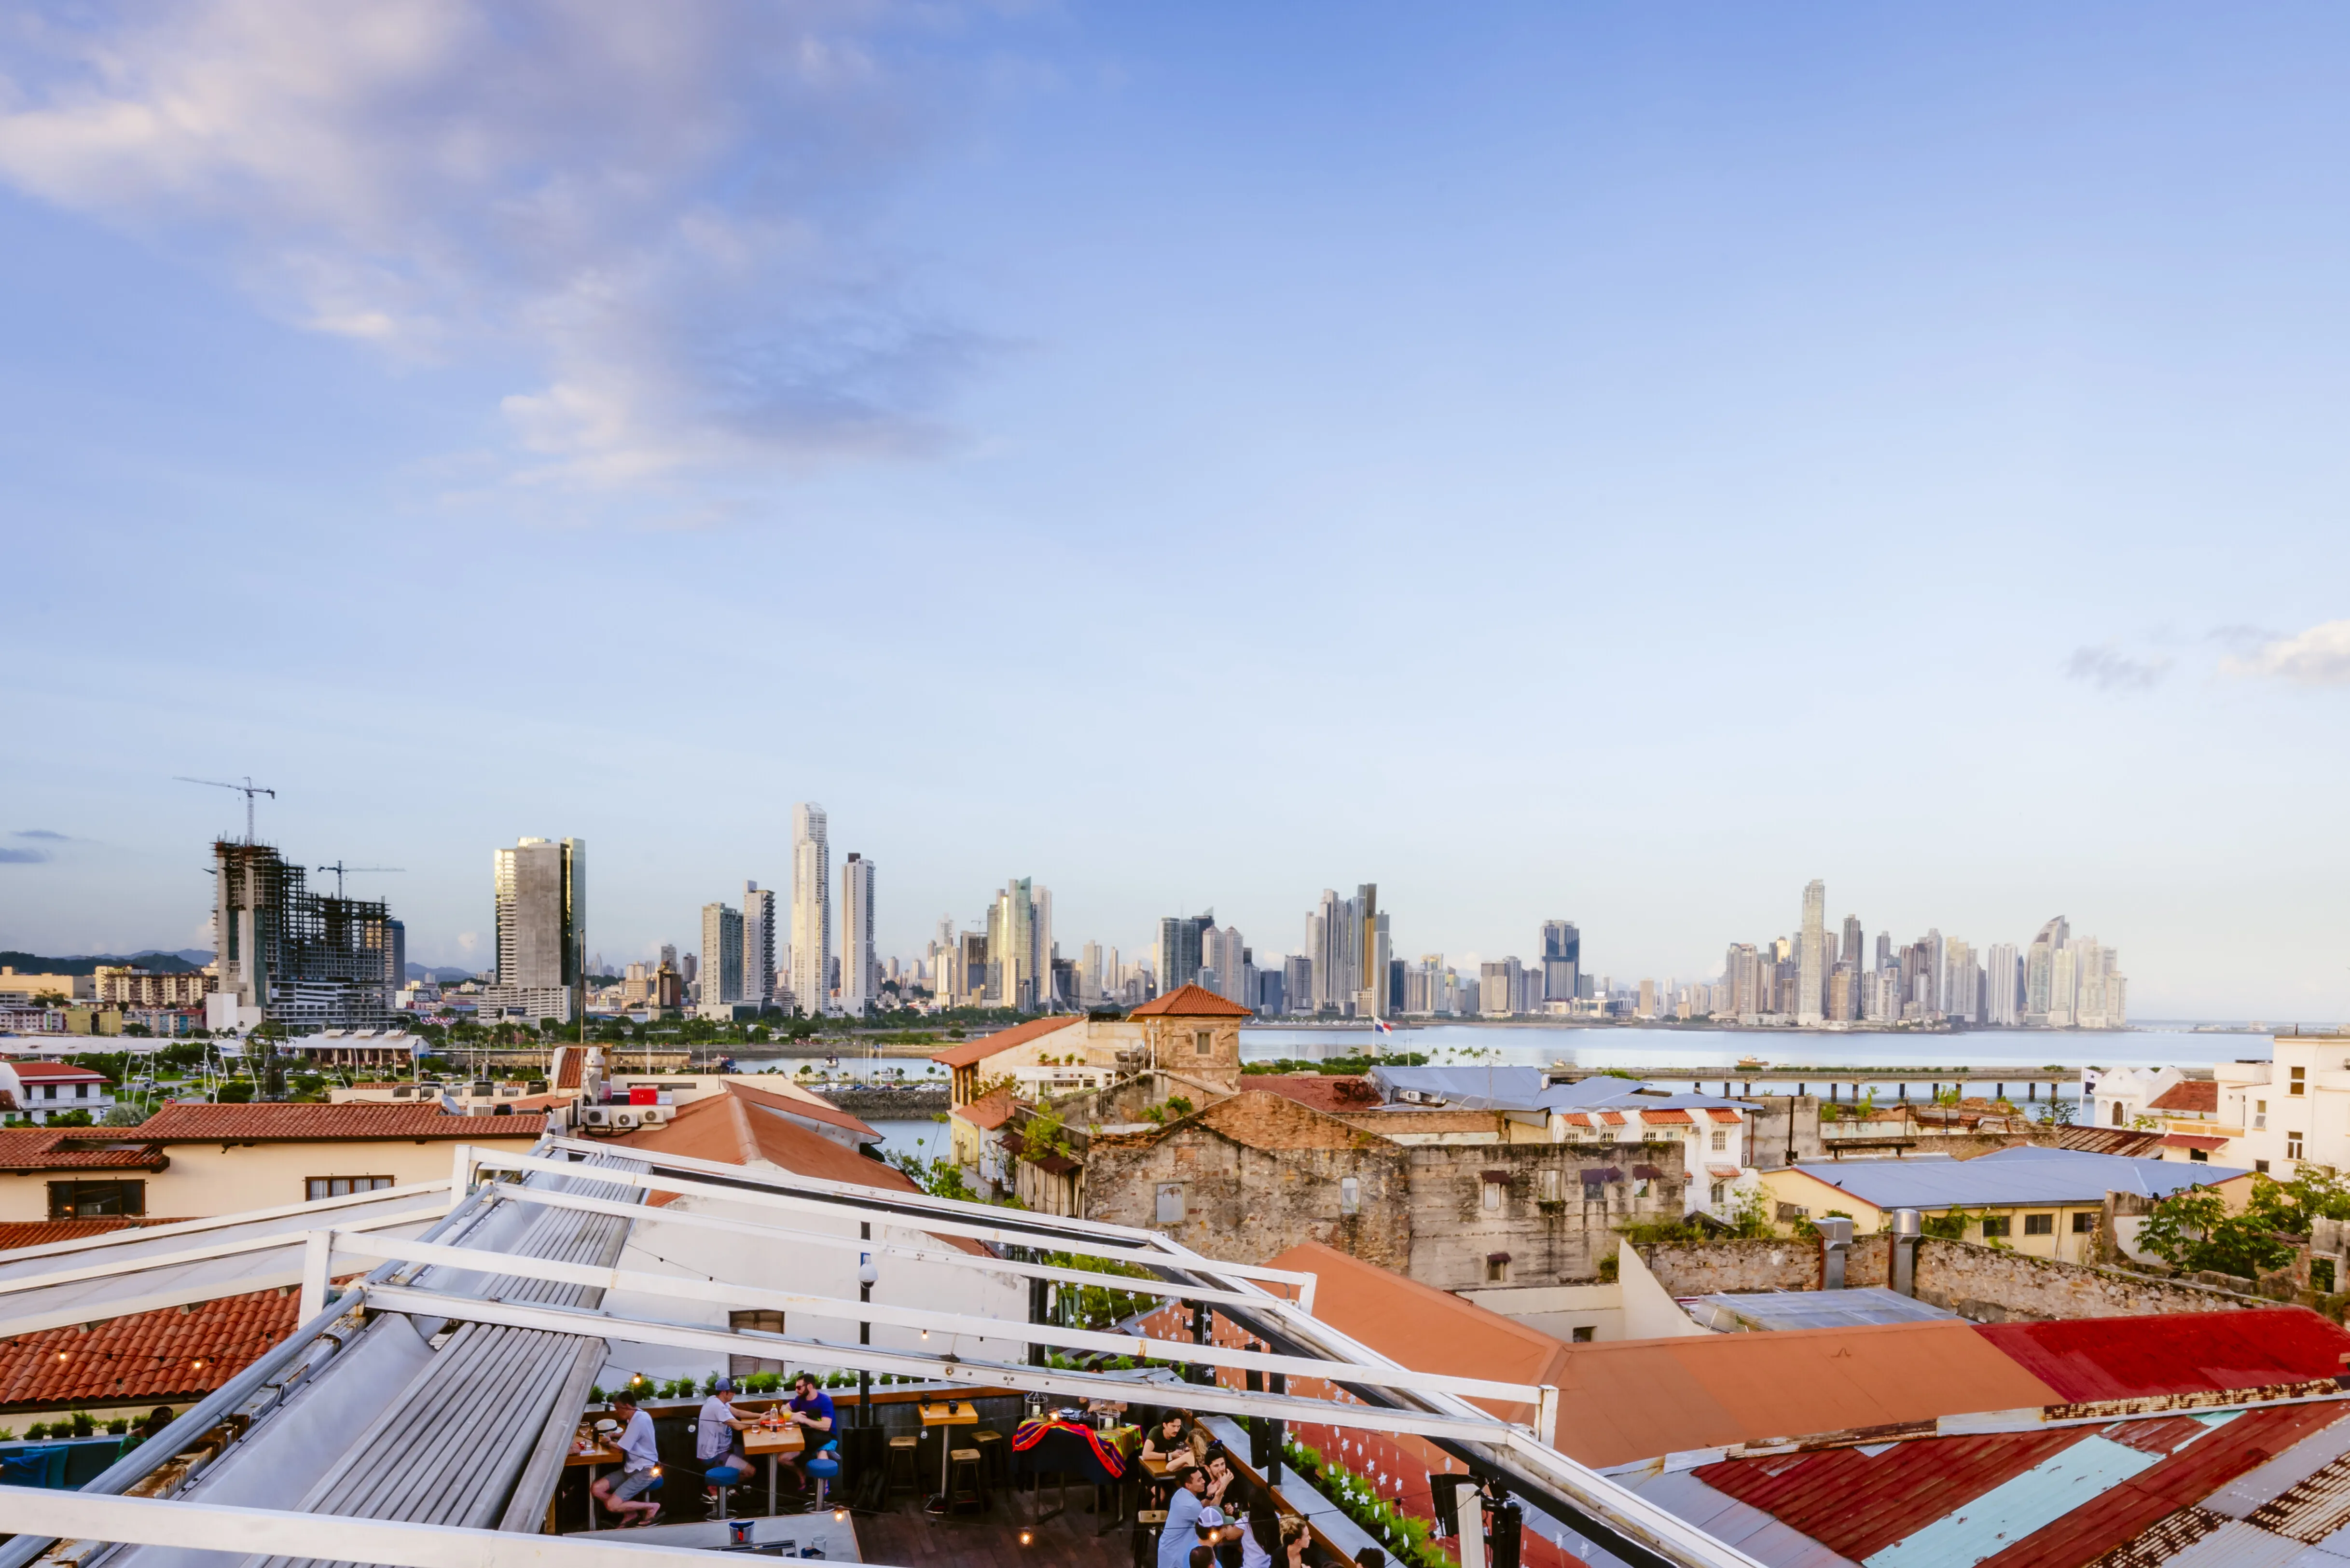 Tantalo Roofbar in Panama, North America  - Rated 4.4